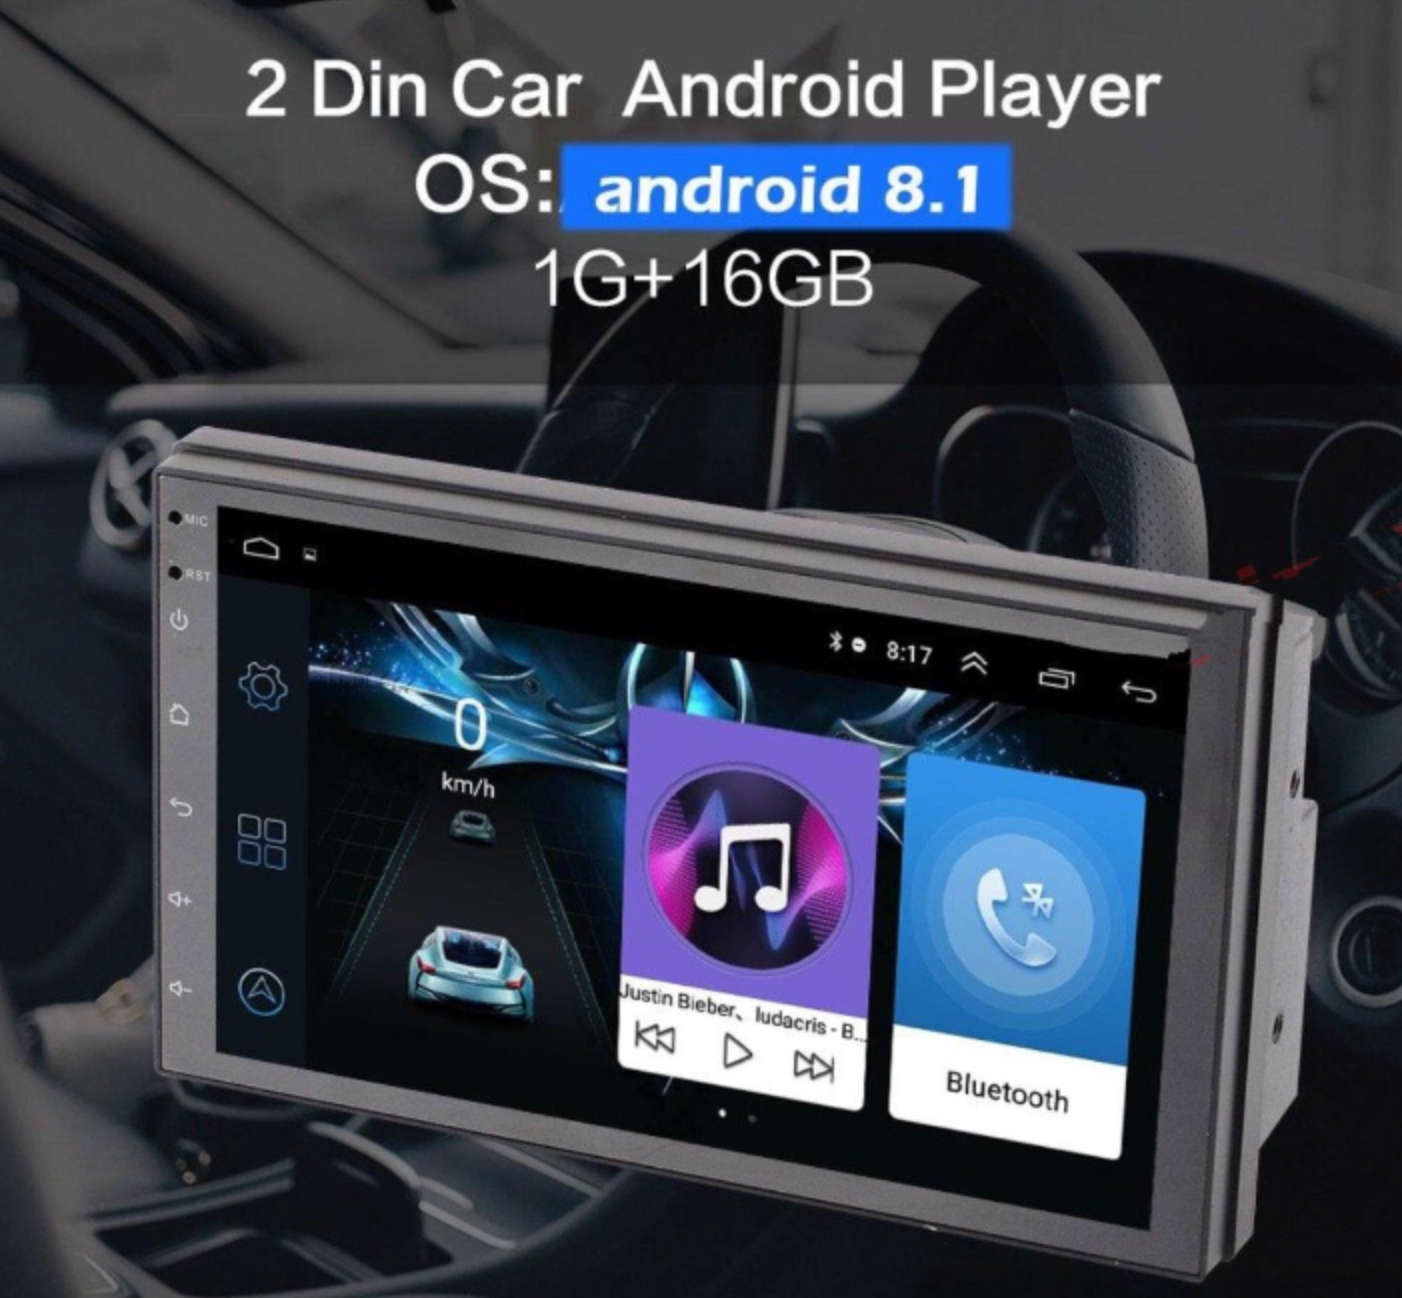 **SPECIAL!** Universal Car Stereo CarPlay / Android Auto 2 DIN 7” + Compatible with Toyota Harness, GPS Navigation, Bluetooth, USB